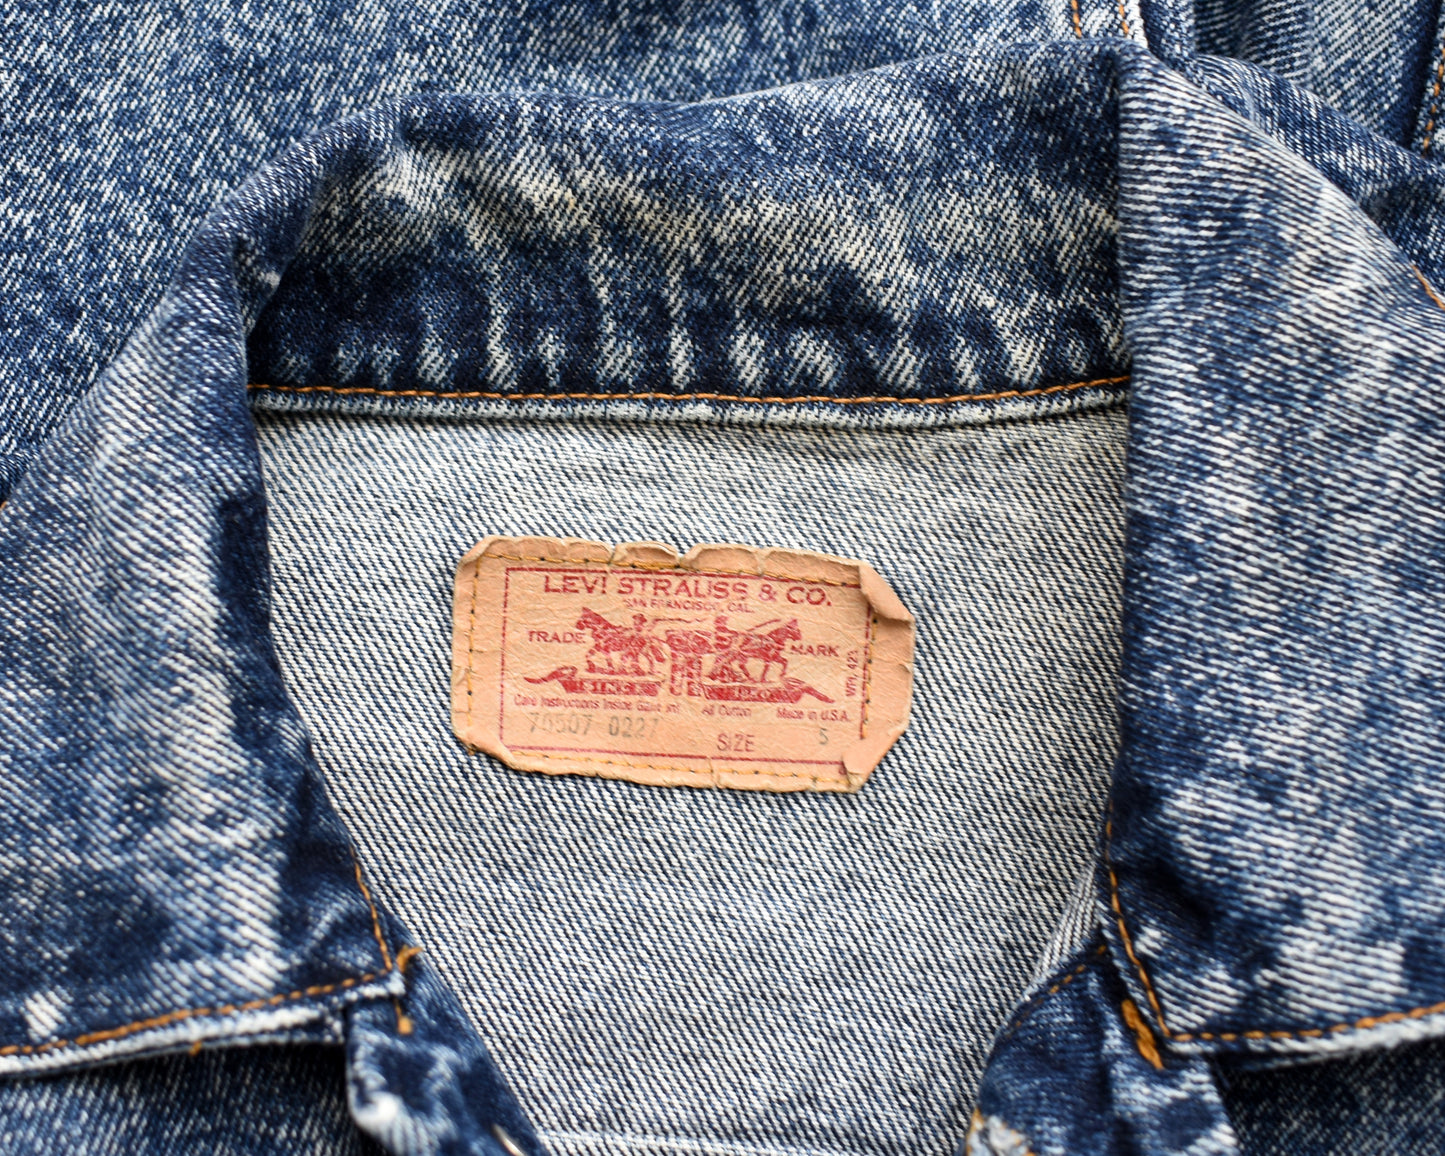 Close up of the tag which says Levis Strauss & Co, along with the numbers 70507-0227